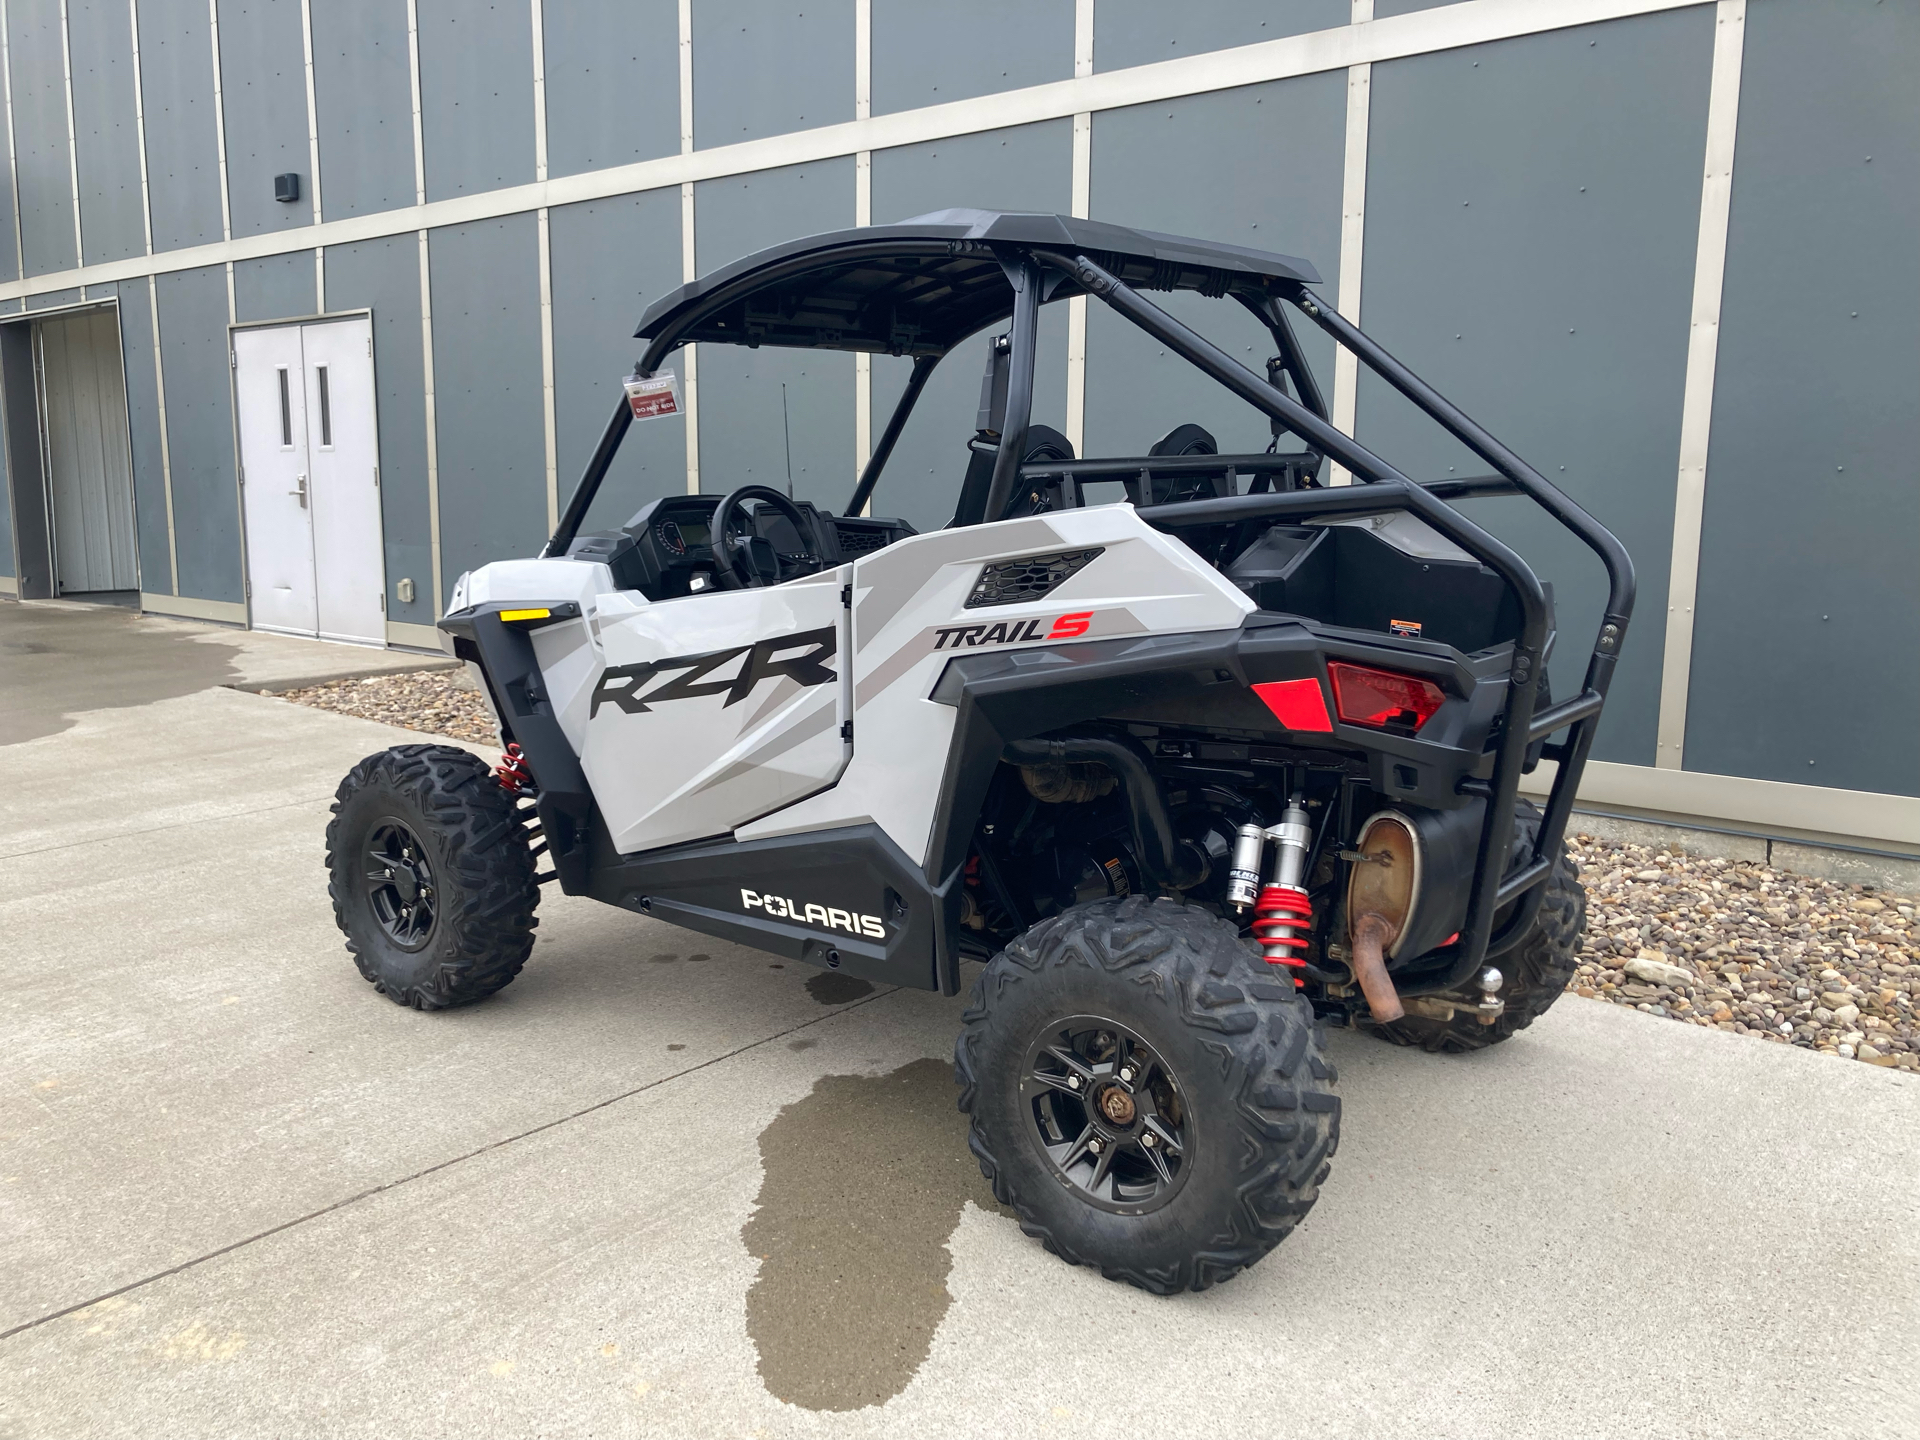 2021 Polaris RZR Trail S 1000 Ultimate in Mineral Wells, West Virginia - Photo 5